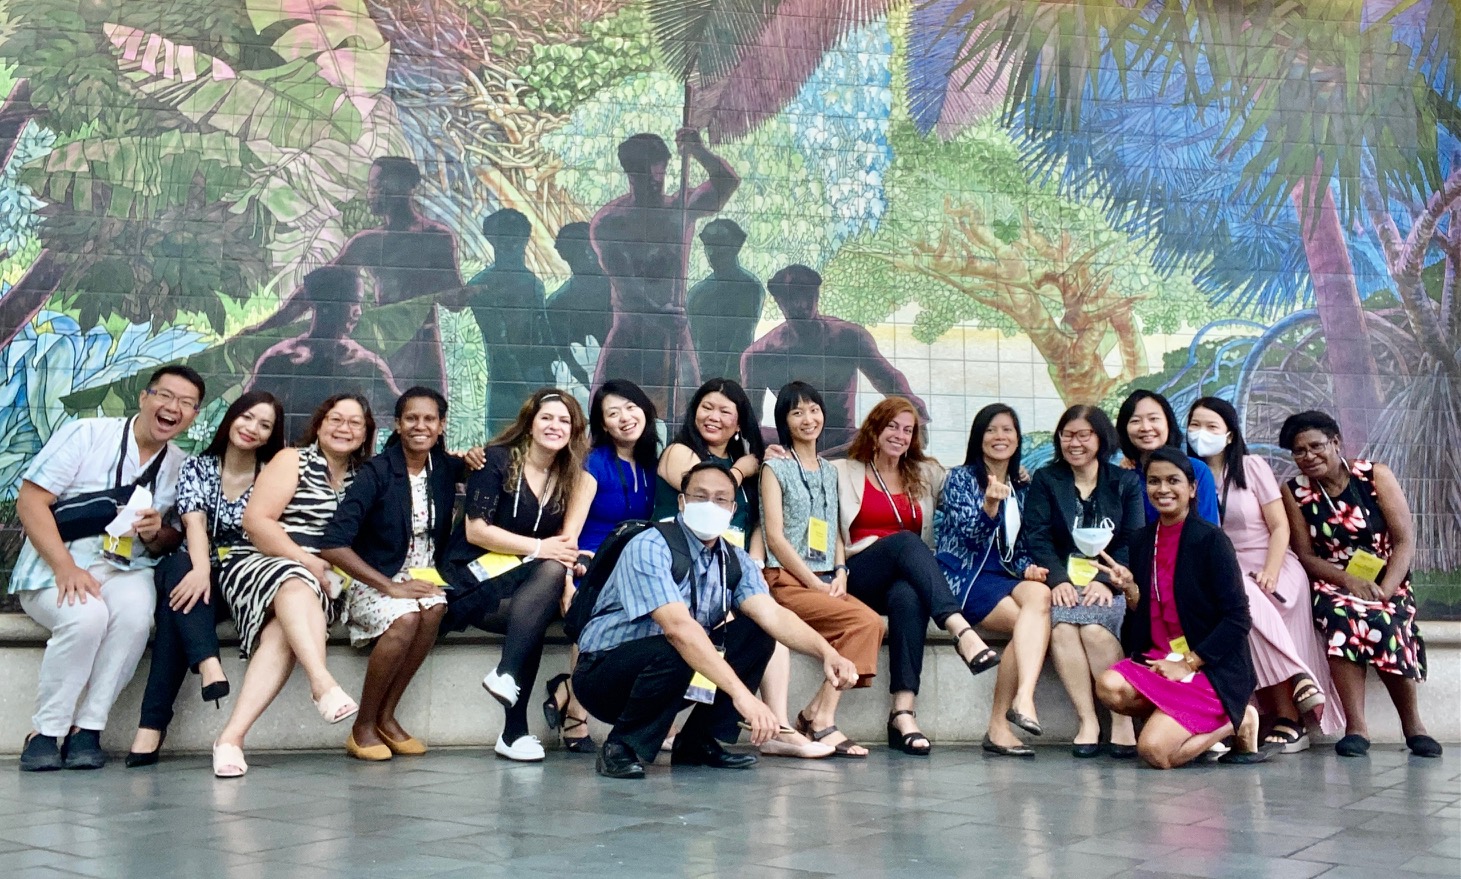 A group photo of the 2022 Asia Pacific Leadership Program Fellows smiling in front of a decorative jungle themed mural.